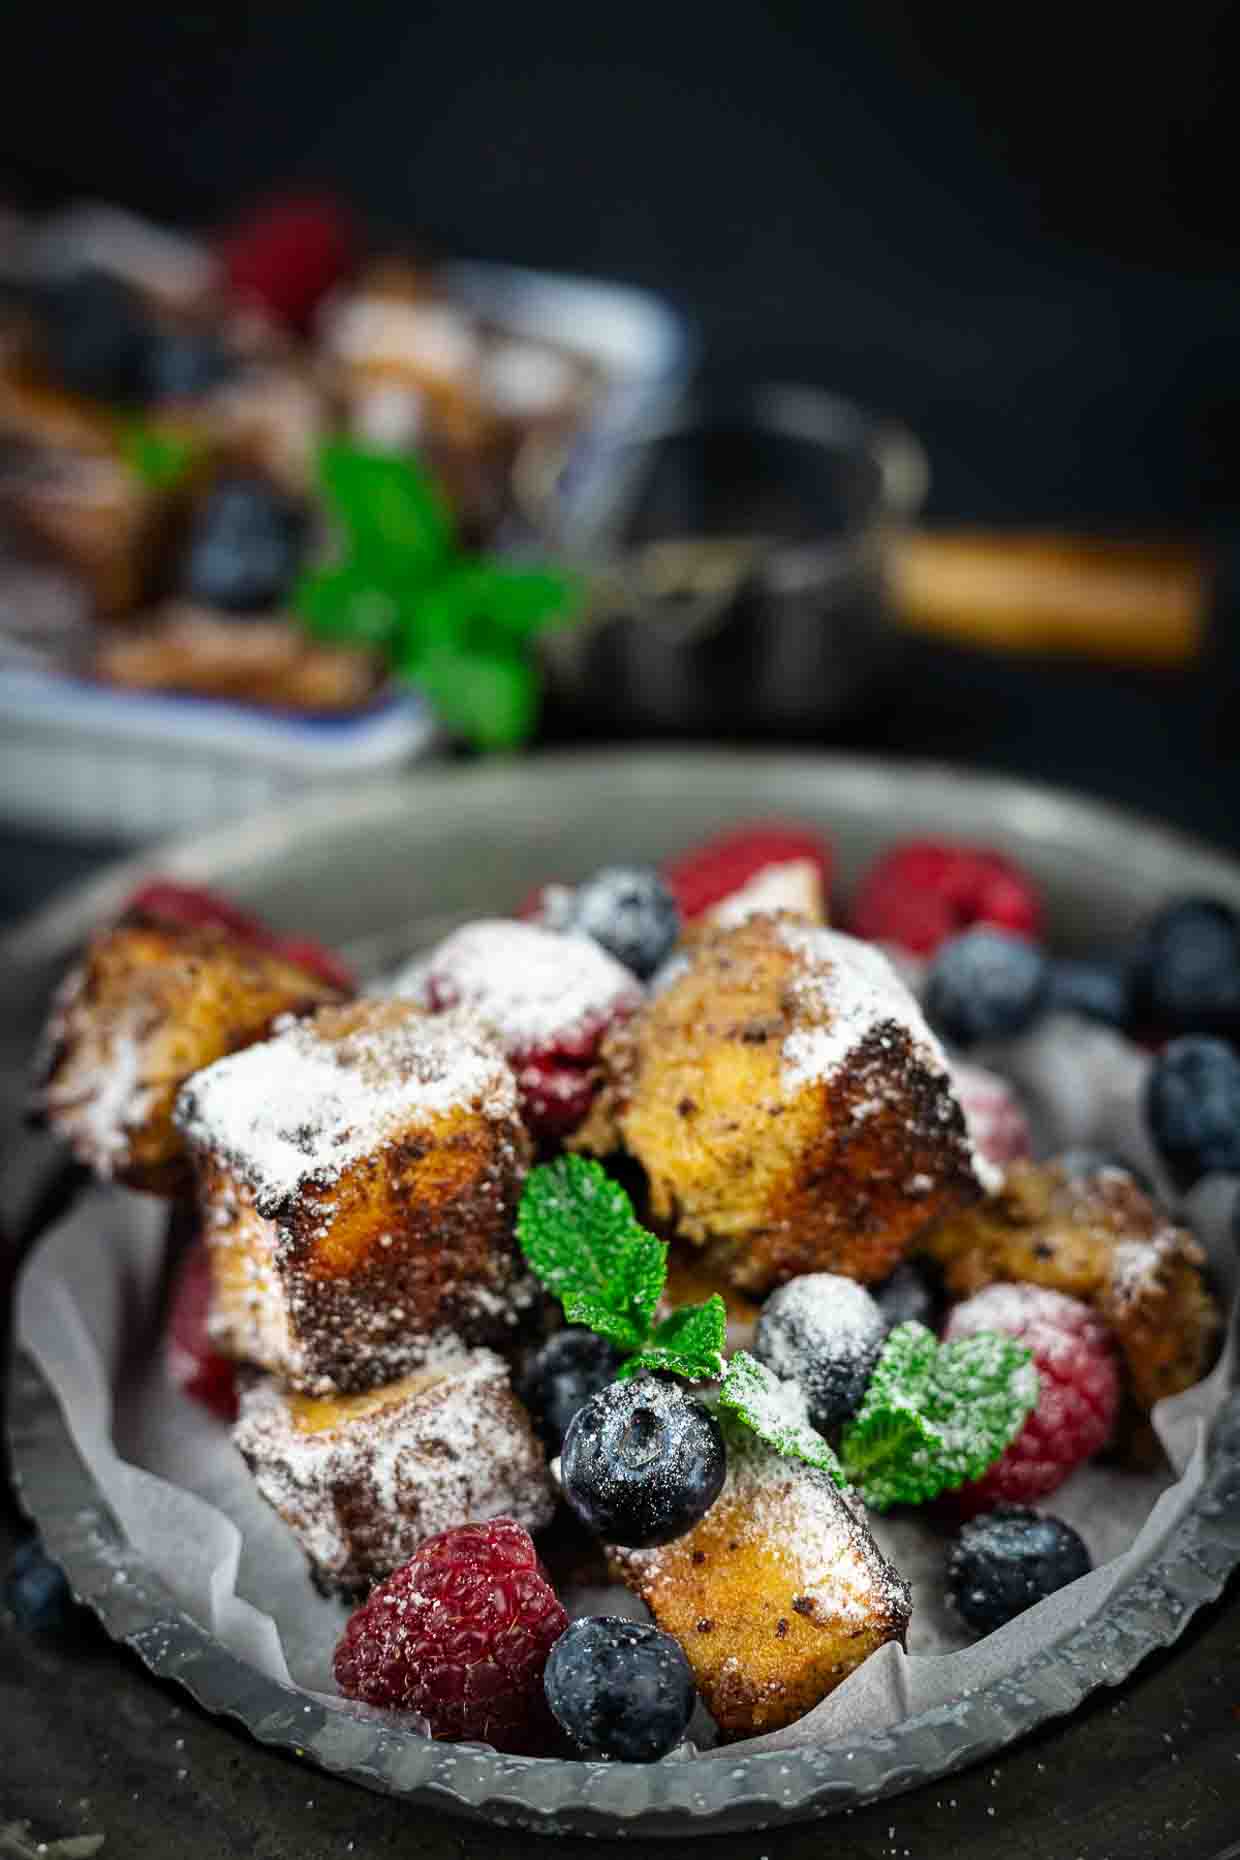 French Toast Pudding served with berries.